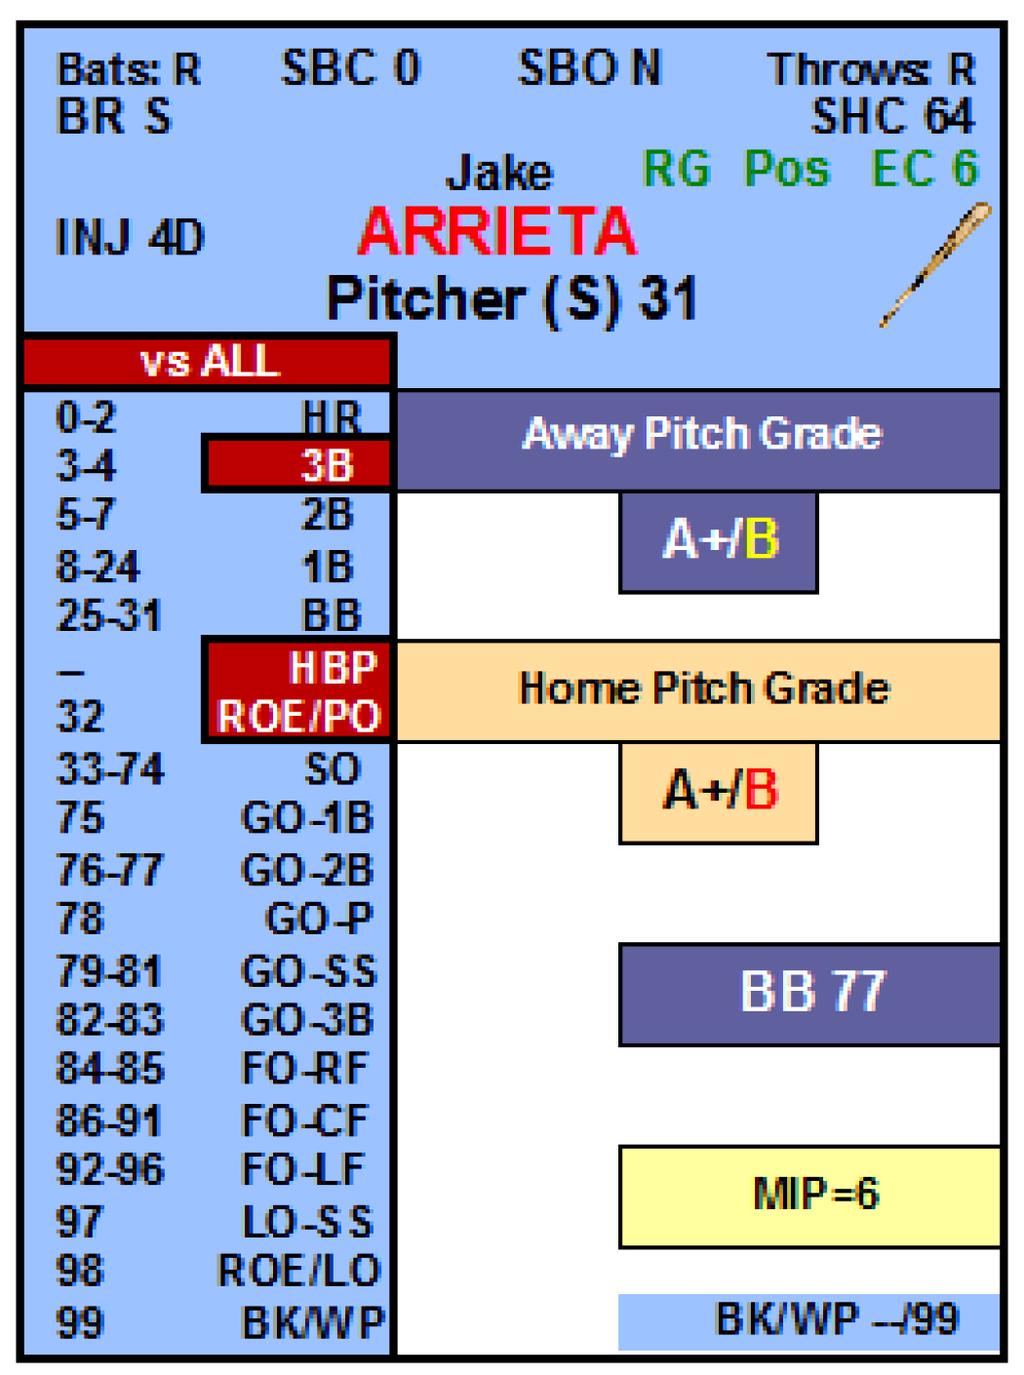 Row 5- This row shows the pitchers role by letter S, R, or C. Since Arrieta is a starter, an (S) is displayed here.